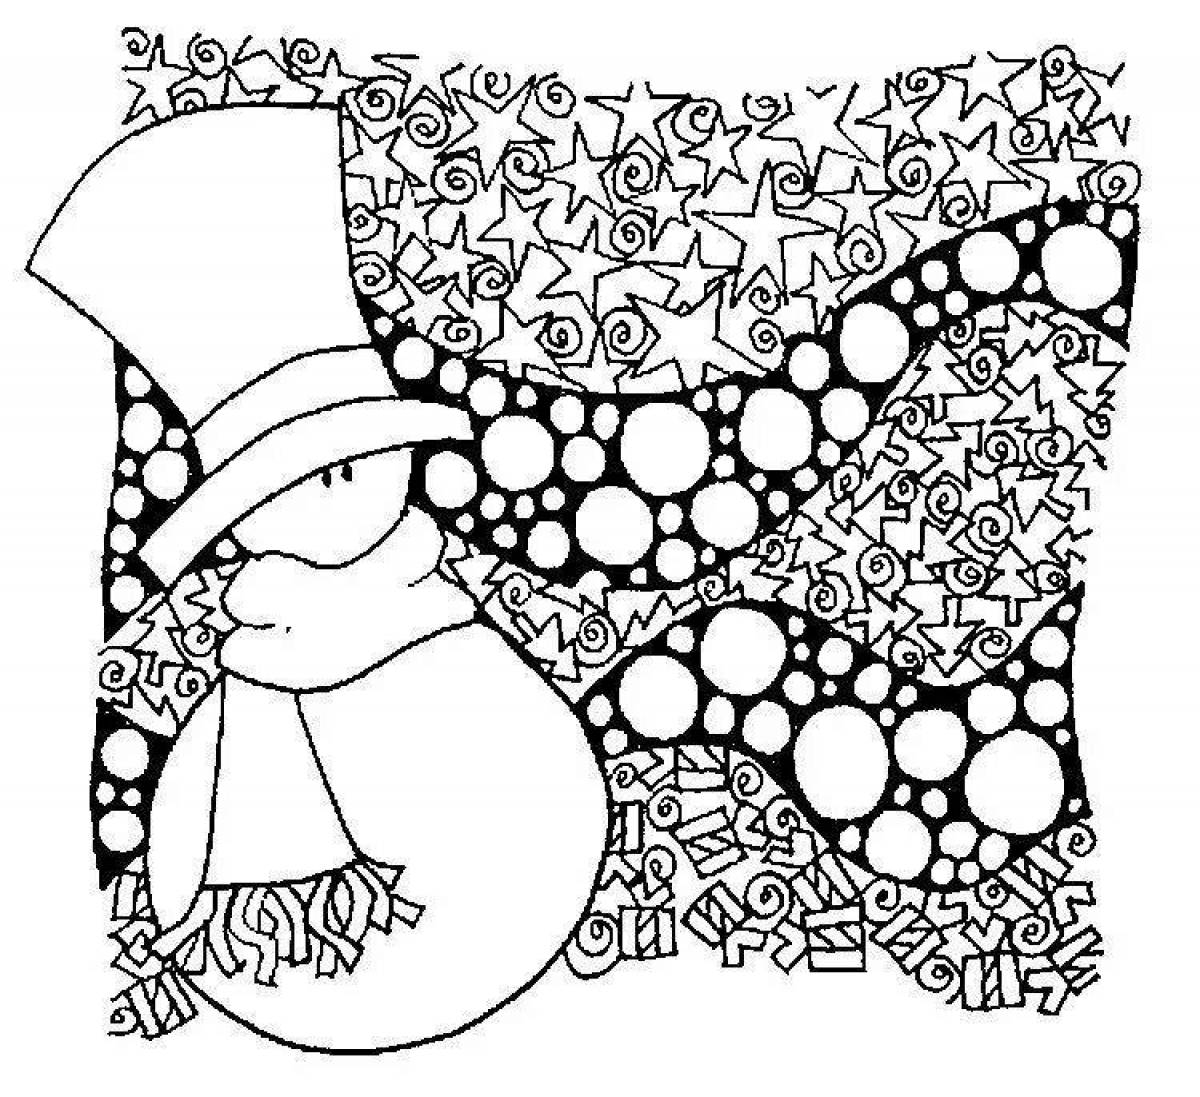 Cheerful snowman antistress coloring book